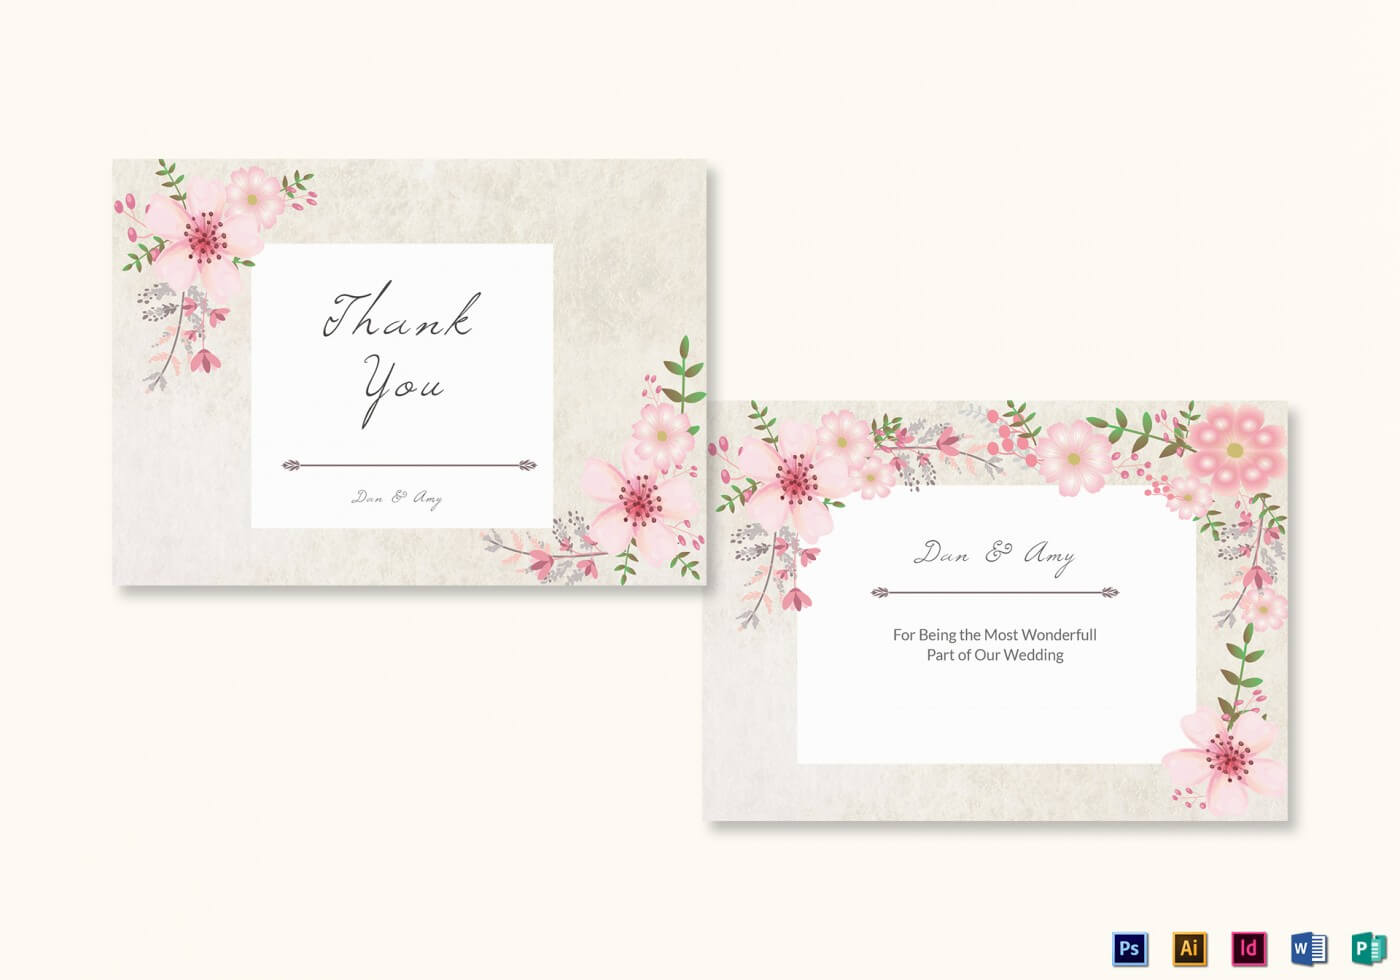 011 Template Ideas Thank You Card Templates Il Fullxfull Throughout Thank You Card Template Word